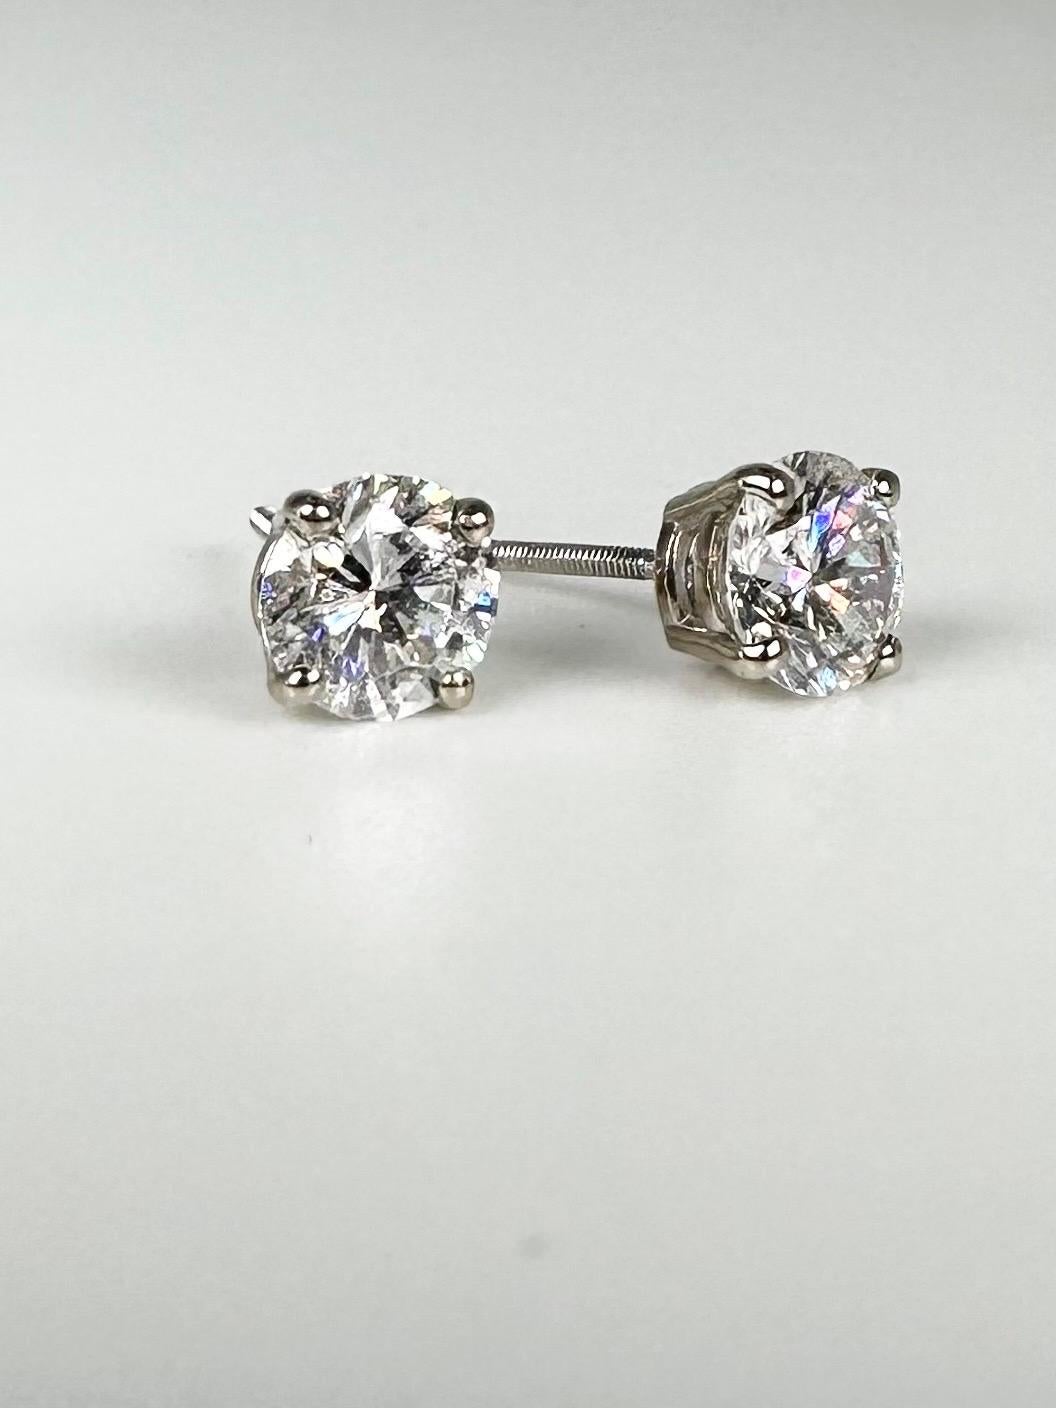 
A pair of sophisticated diamond studs with screw back design for extra security and GIA certificates for piece of mind!

GOLD: 14KT gold
NATURAL DIAMOND(S)
Clarity/Color: VS/F
Carat:1.28ct (GIA certified diamonds)- each earrings is 0.64ct
Cut:Round